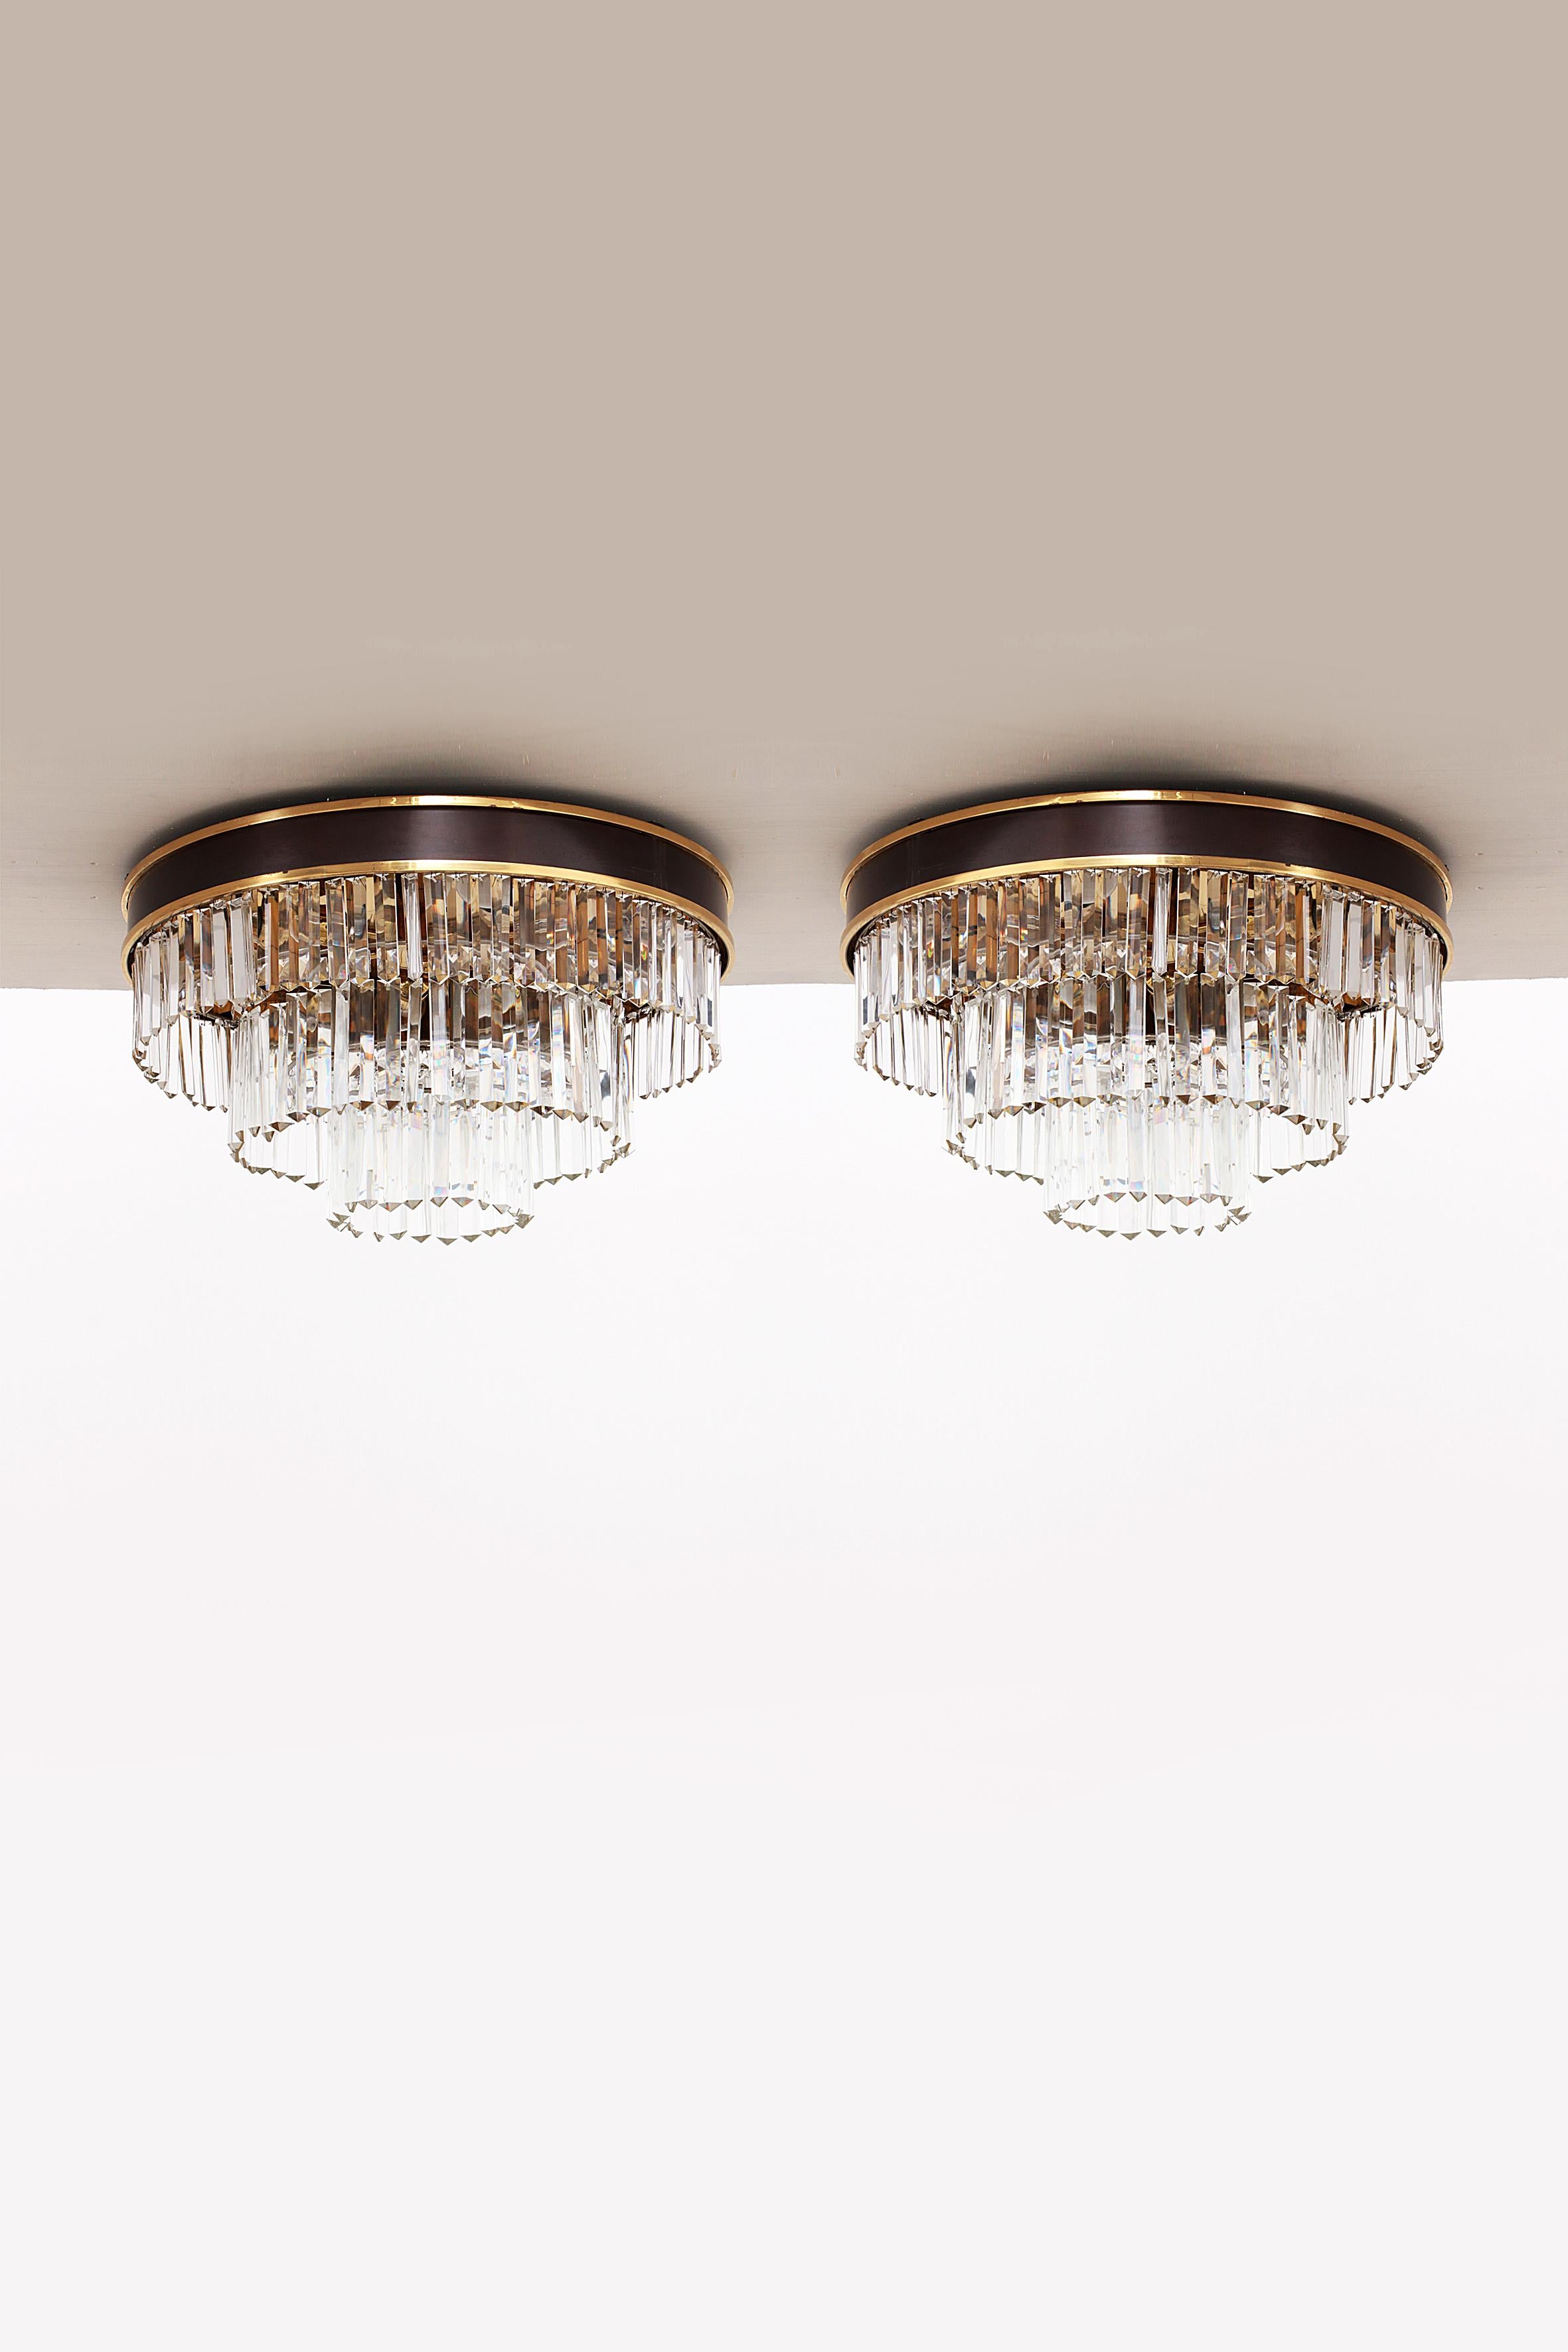 Gold-Plated Crystal Ceiling Lamp by L.A. Riedinger, set of 2

This set of two ceiling lamps or chandeliers are specially made on request.

The woman who first owned this lamp had seen this model hanging in the National Theater in Düsseldorf. She was